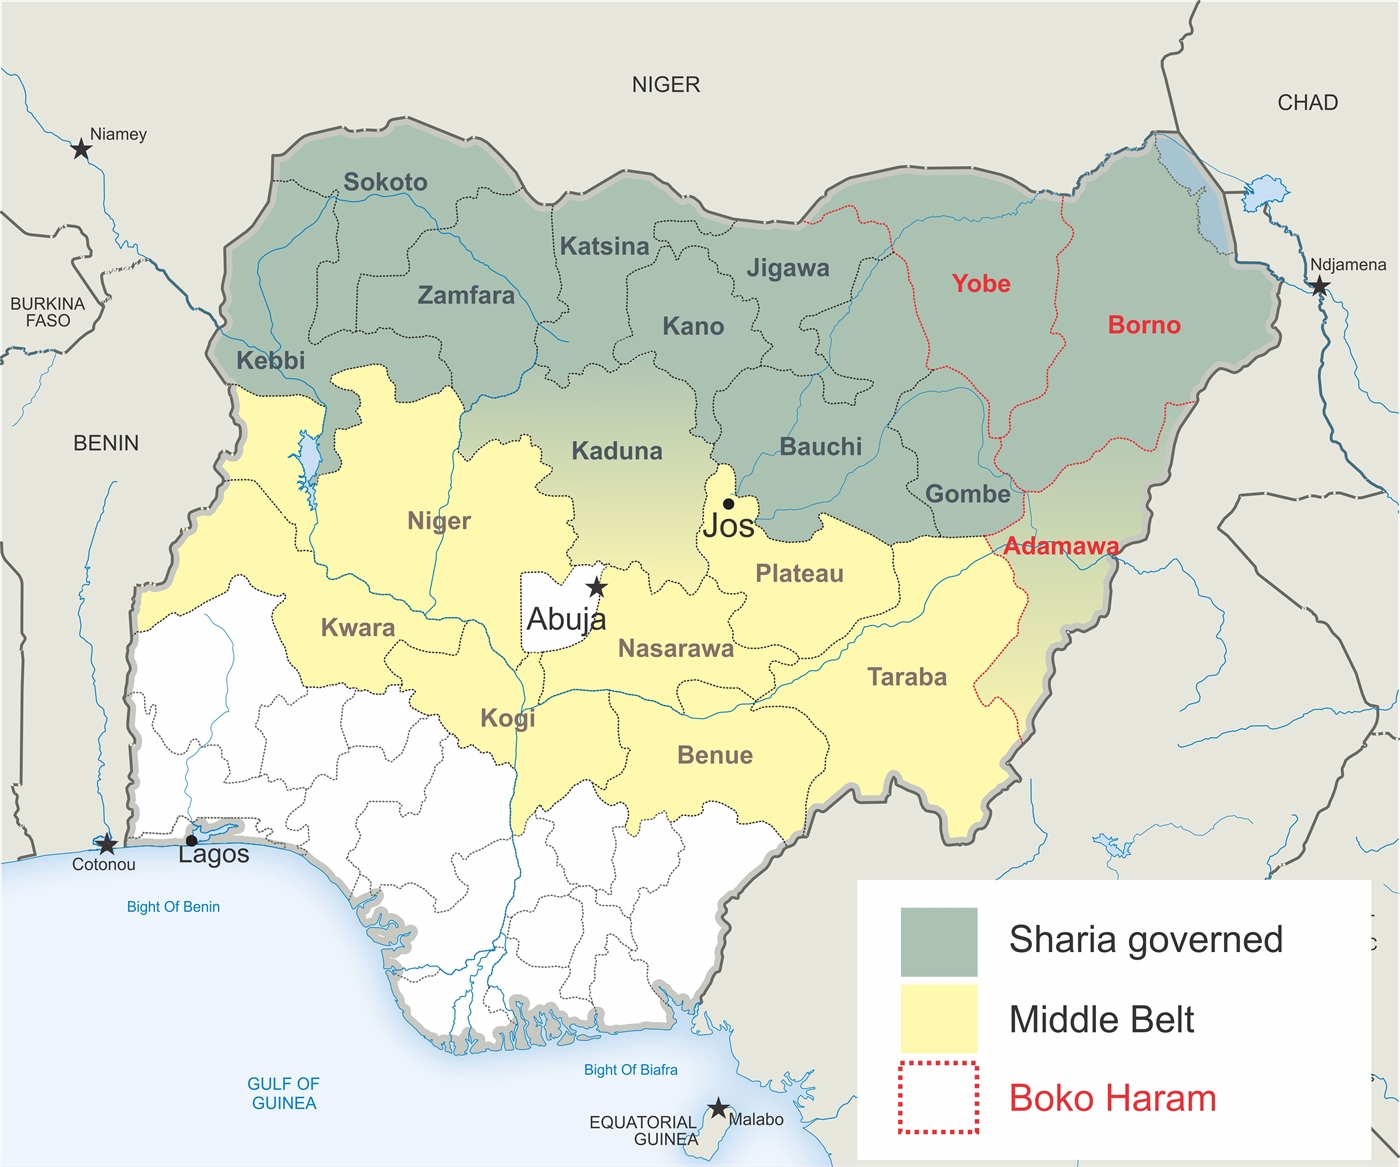 Nigeria's 'Middle Belt' is made up of a handful of states straddling the pre-colonial line dividing Nigeria’s predominantly Muslim north from its Christian south.